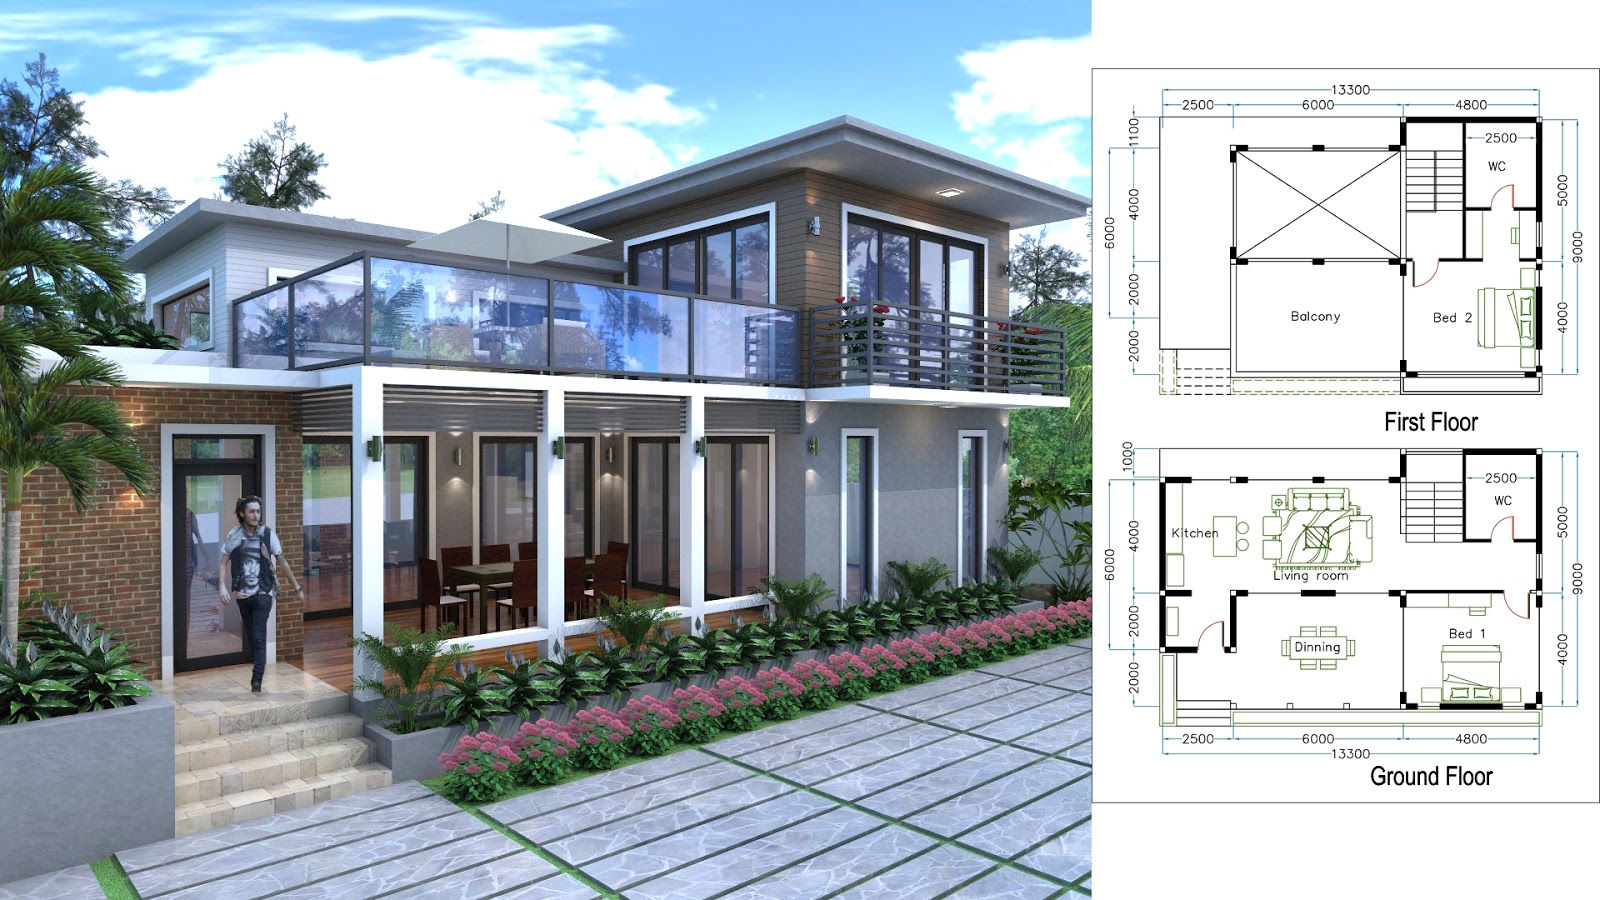 Drawing House Plans In Sketchup - Sketchup House Model Modern Pro Plan ...